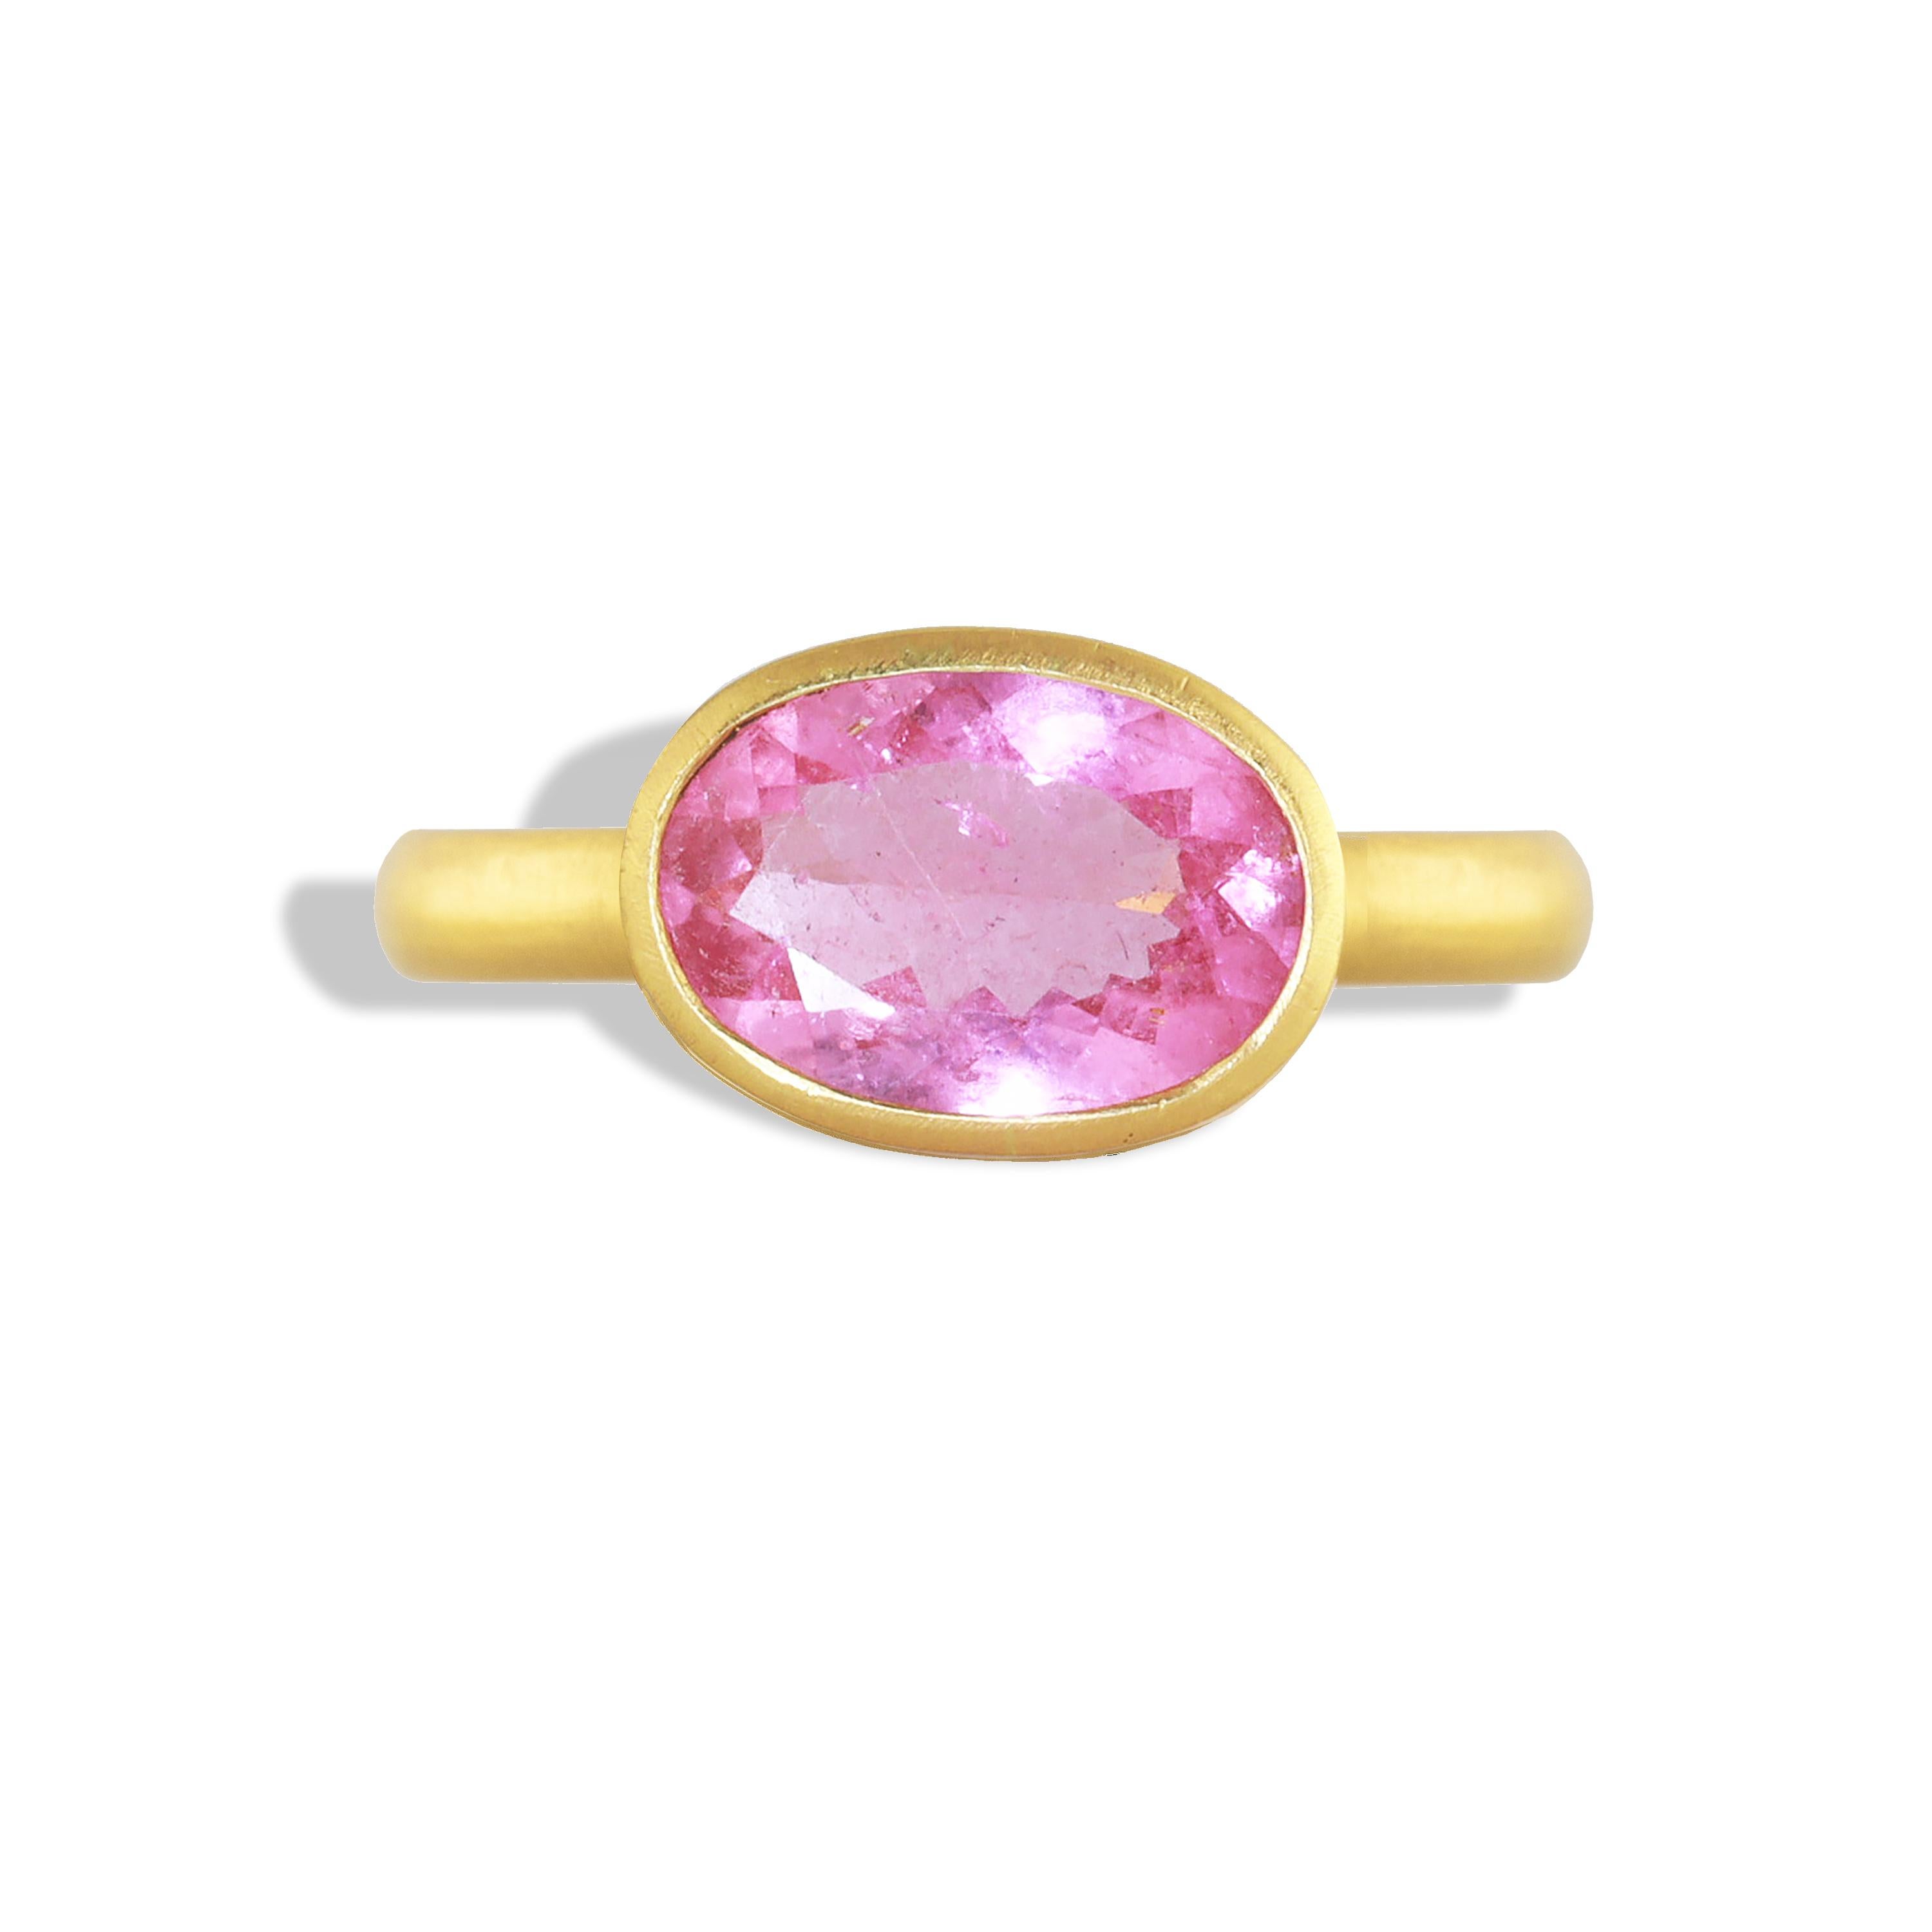 A stand-out 3.52 carat hot pink oval tourmaline is framed in a jali setting of 22k gold. The saturated, pink rose color of the stone peeks through the jali wave cut-outs along the sides. 
Pink tourmaline is said to inspire love, spirituality and